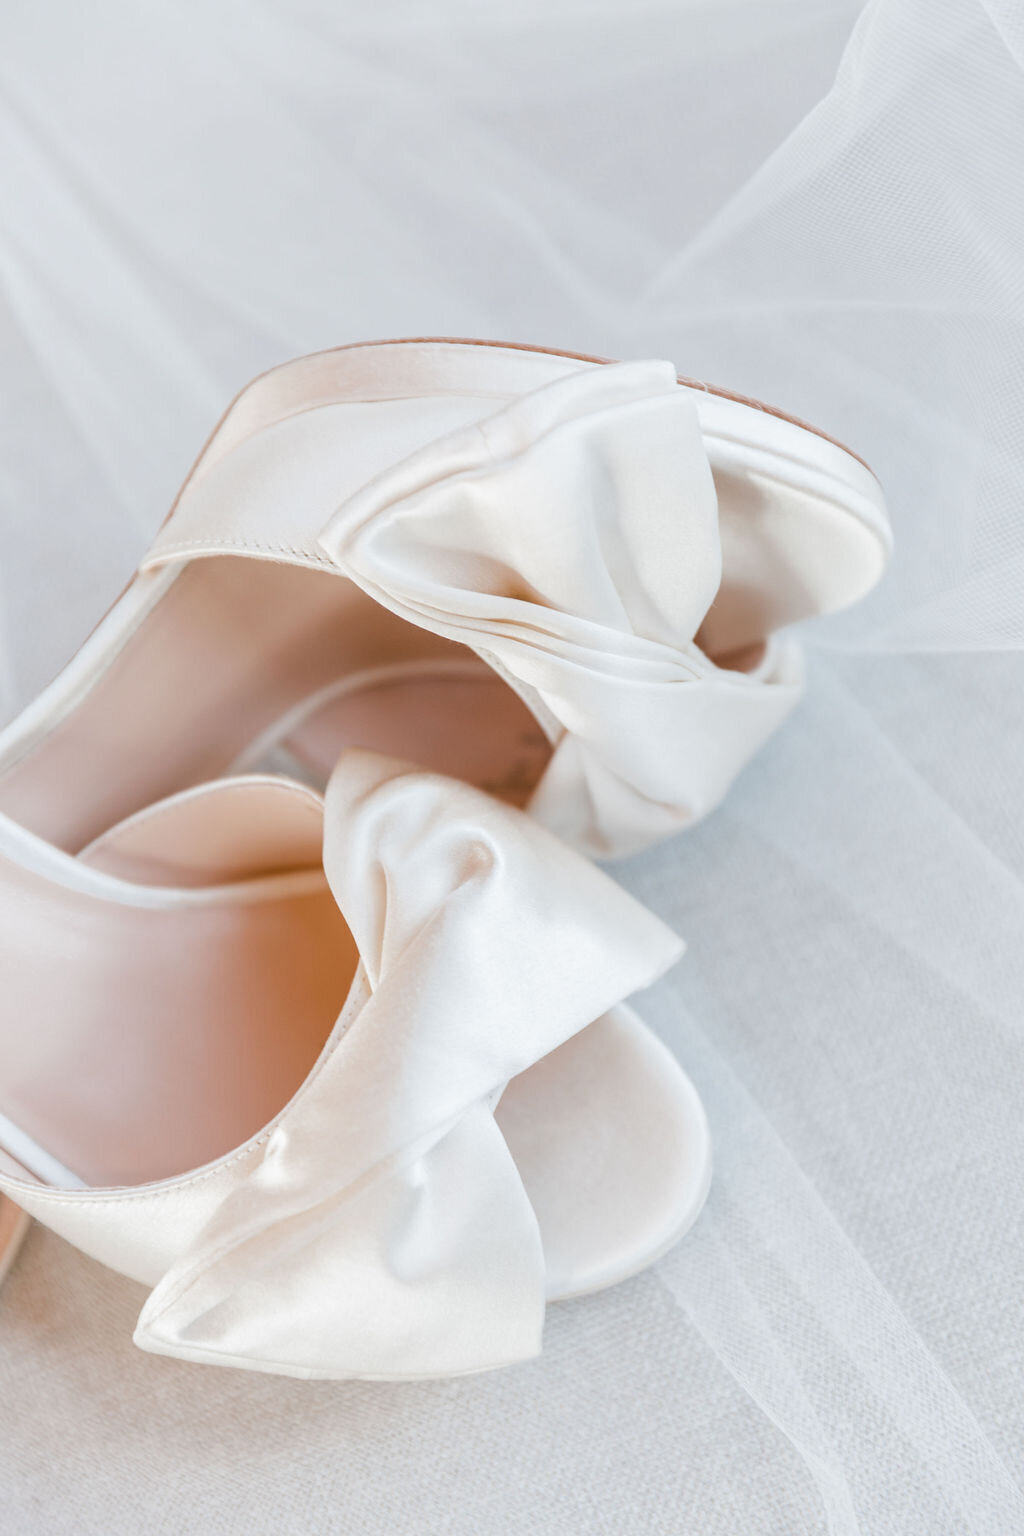 A focus on the bride's wedding shoes, combining the elements of fine art and the elegance of wedding fashion